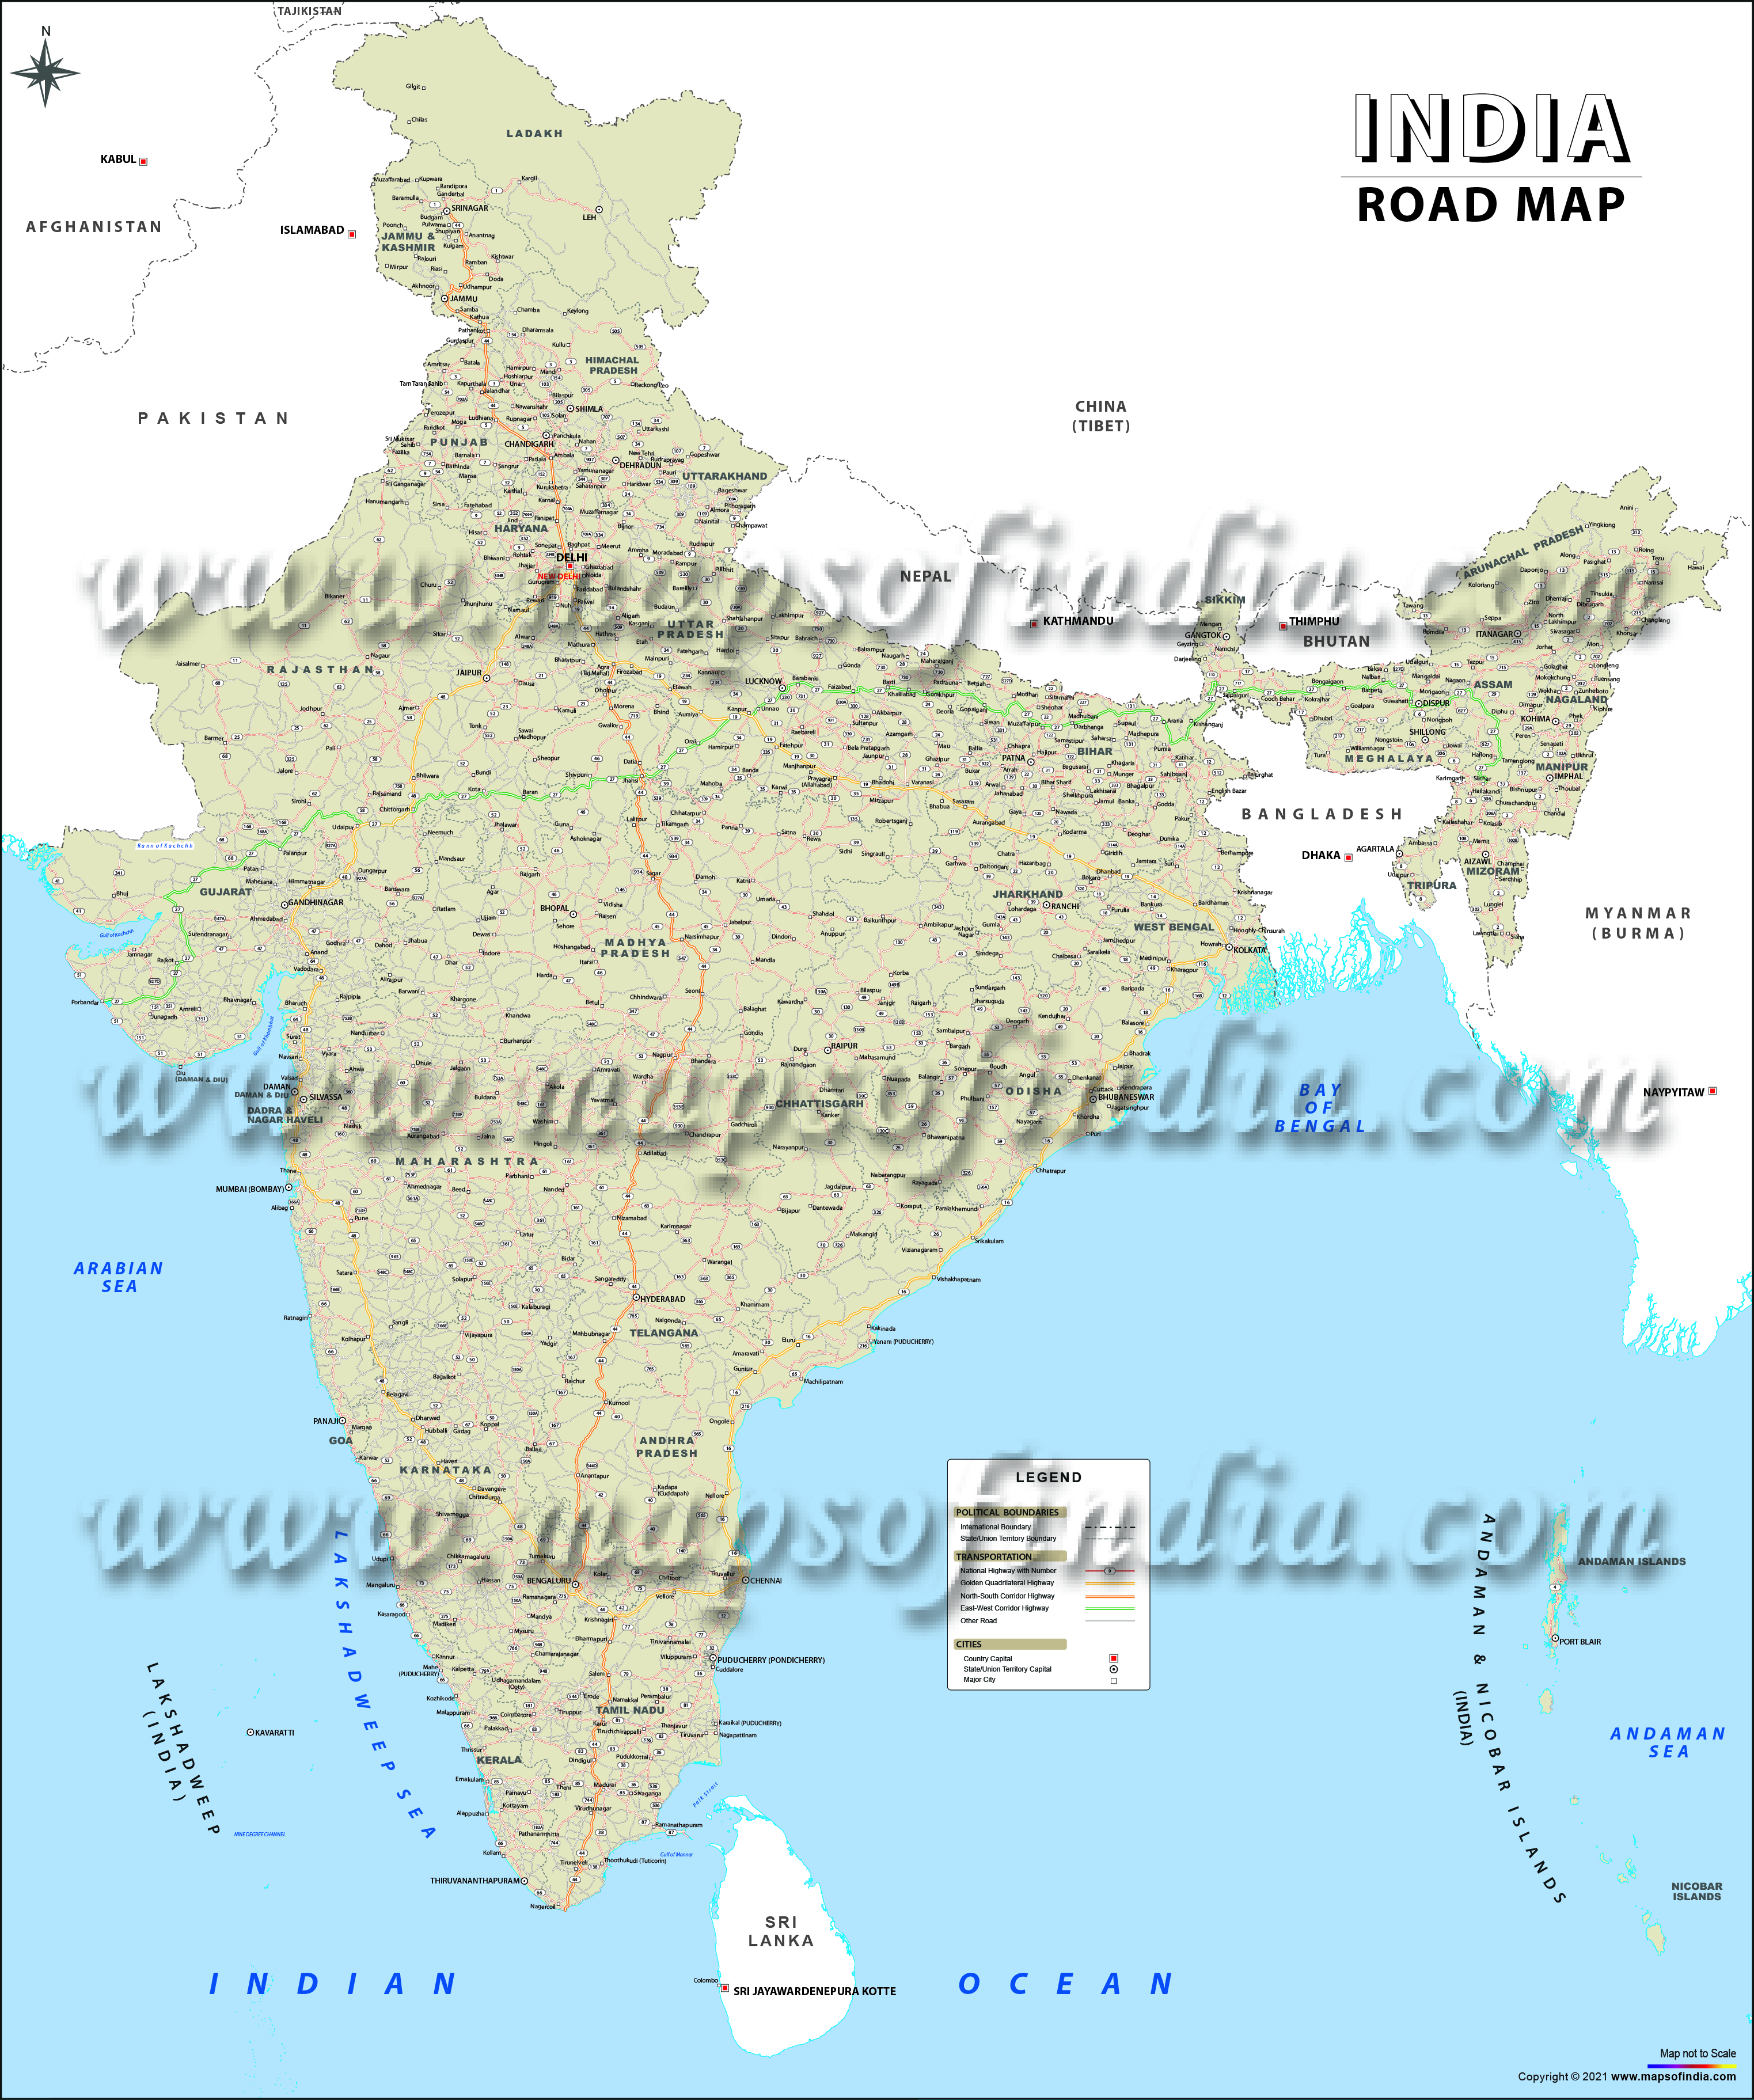 Road Map Of India India Road Maps, Indian Road Network, List of Expressways India